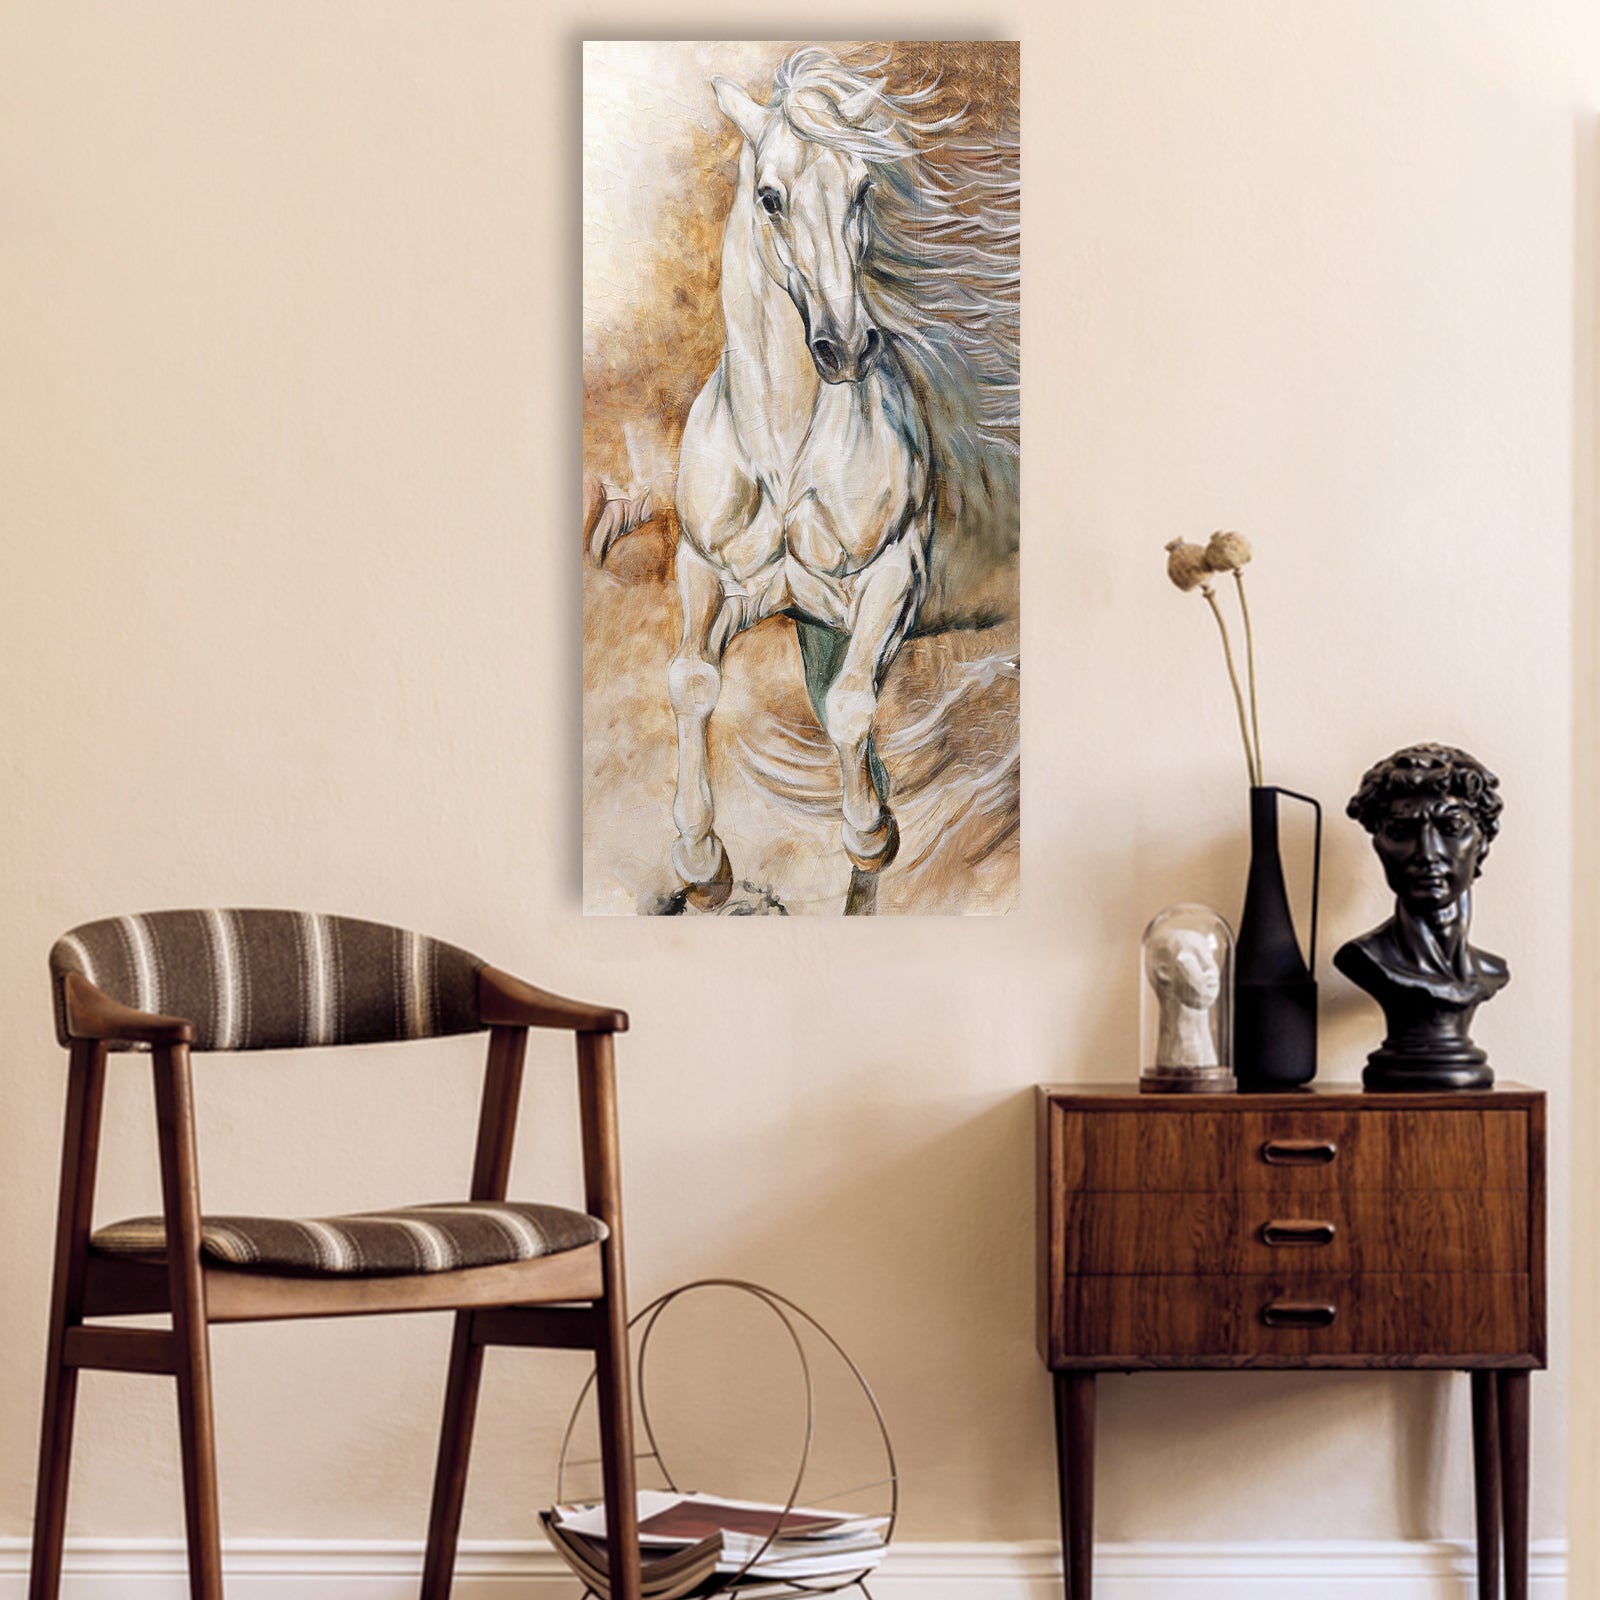 Running White Horse Art (READY TO HANG) - Wall Art Image by Tailored Canvases